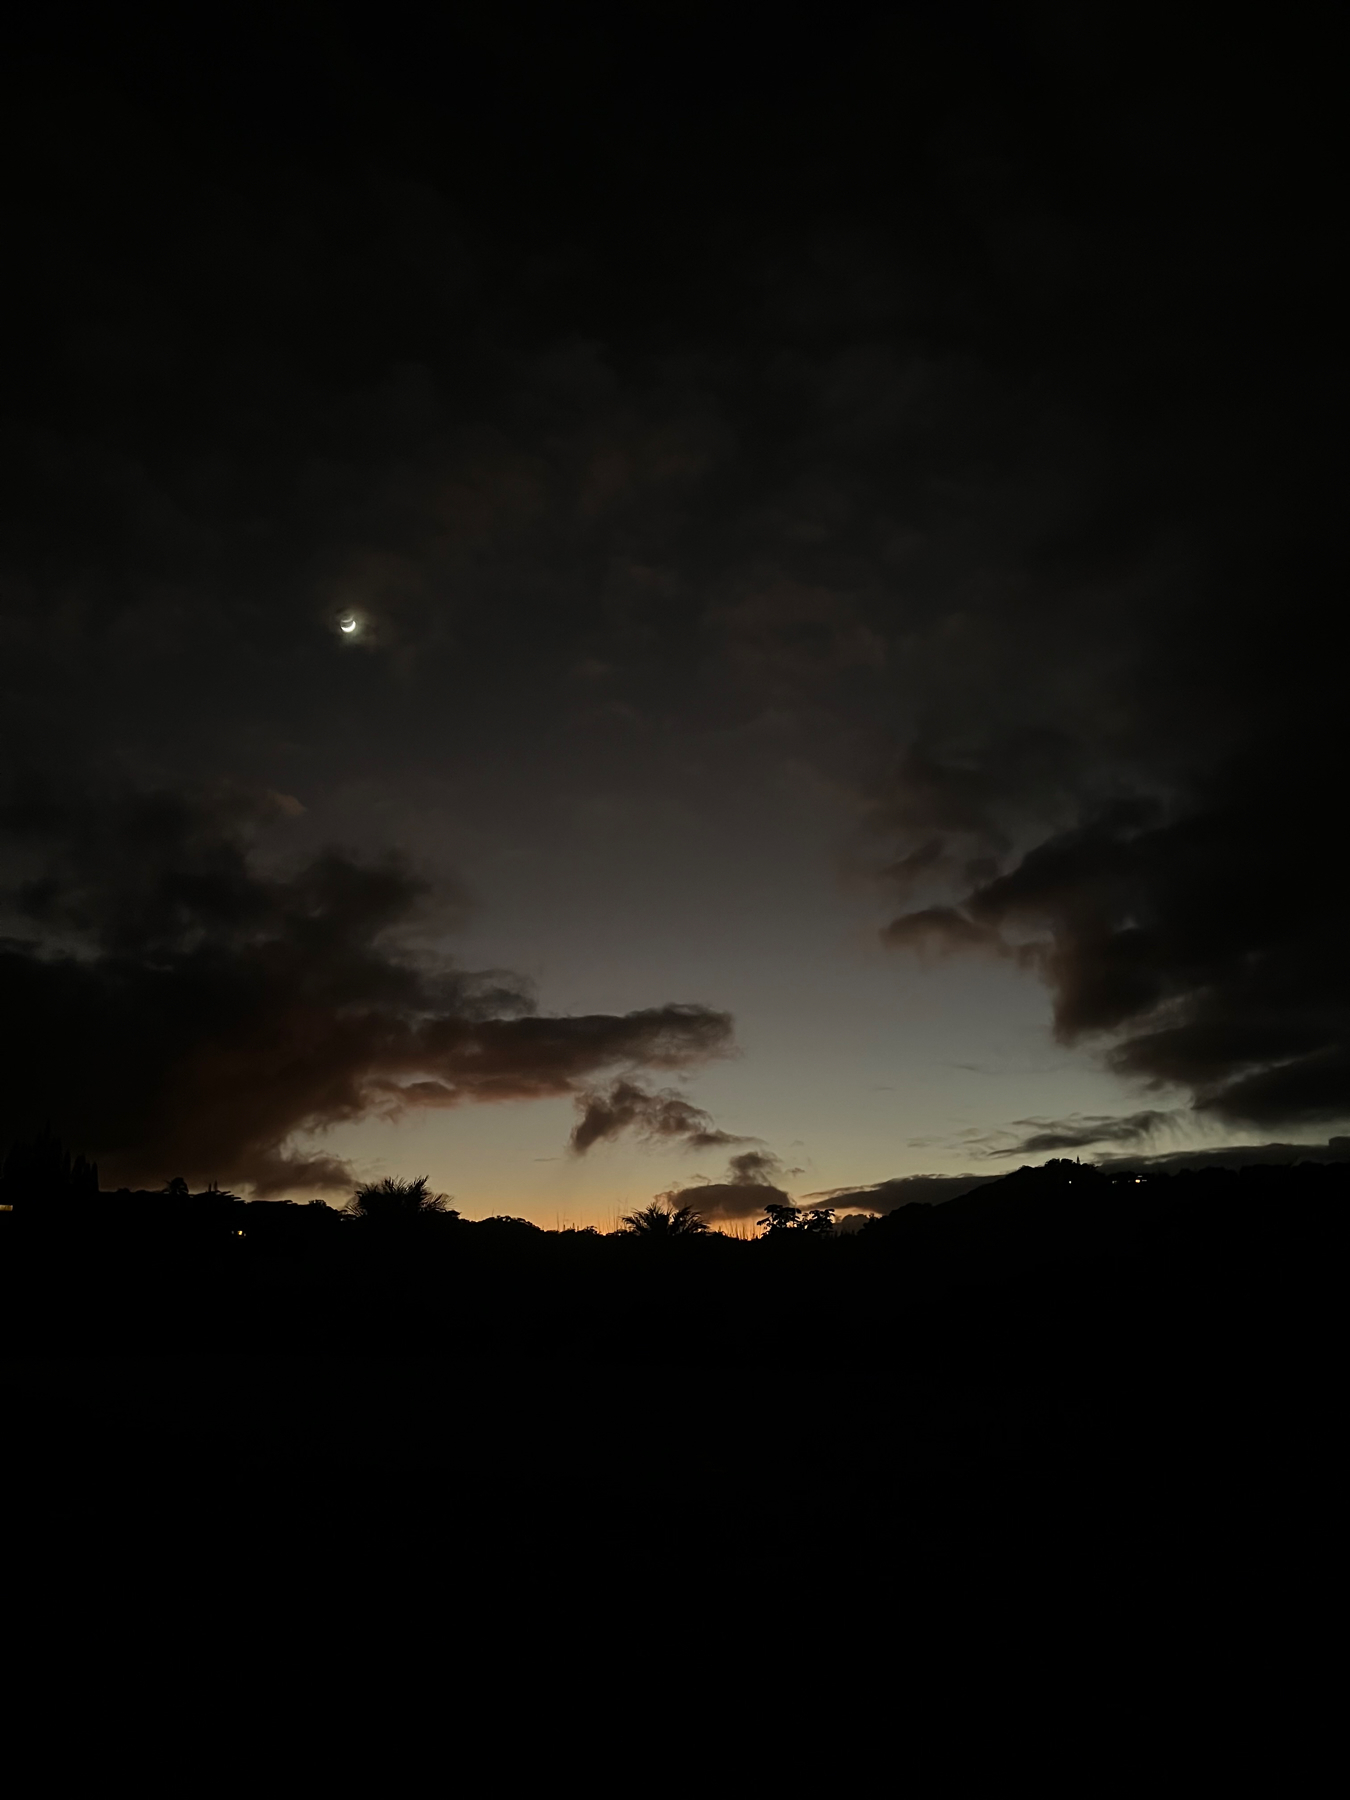 A dark sunset sky with clouds and a crescent moon, with silhouettes of trees and hills on the horizon.